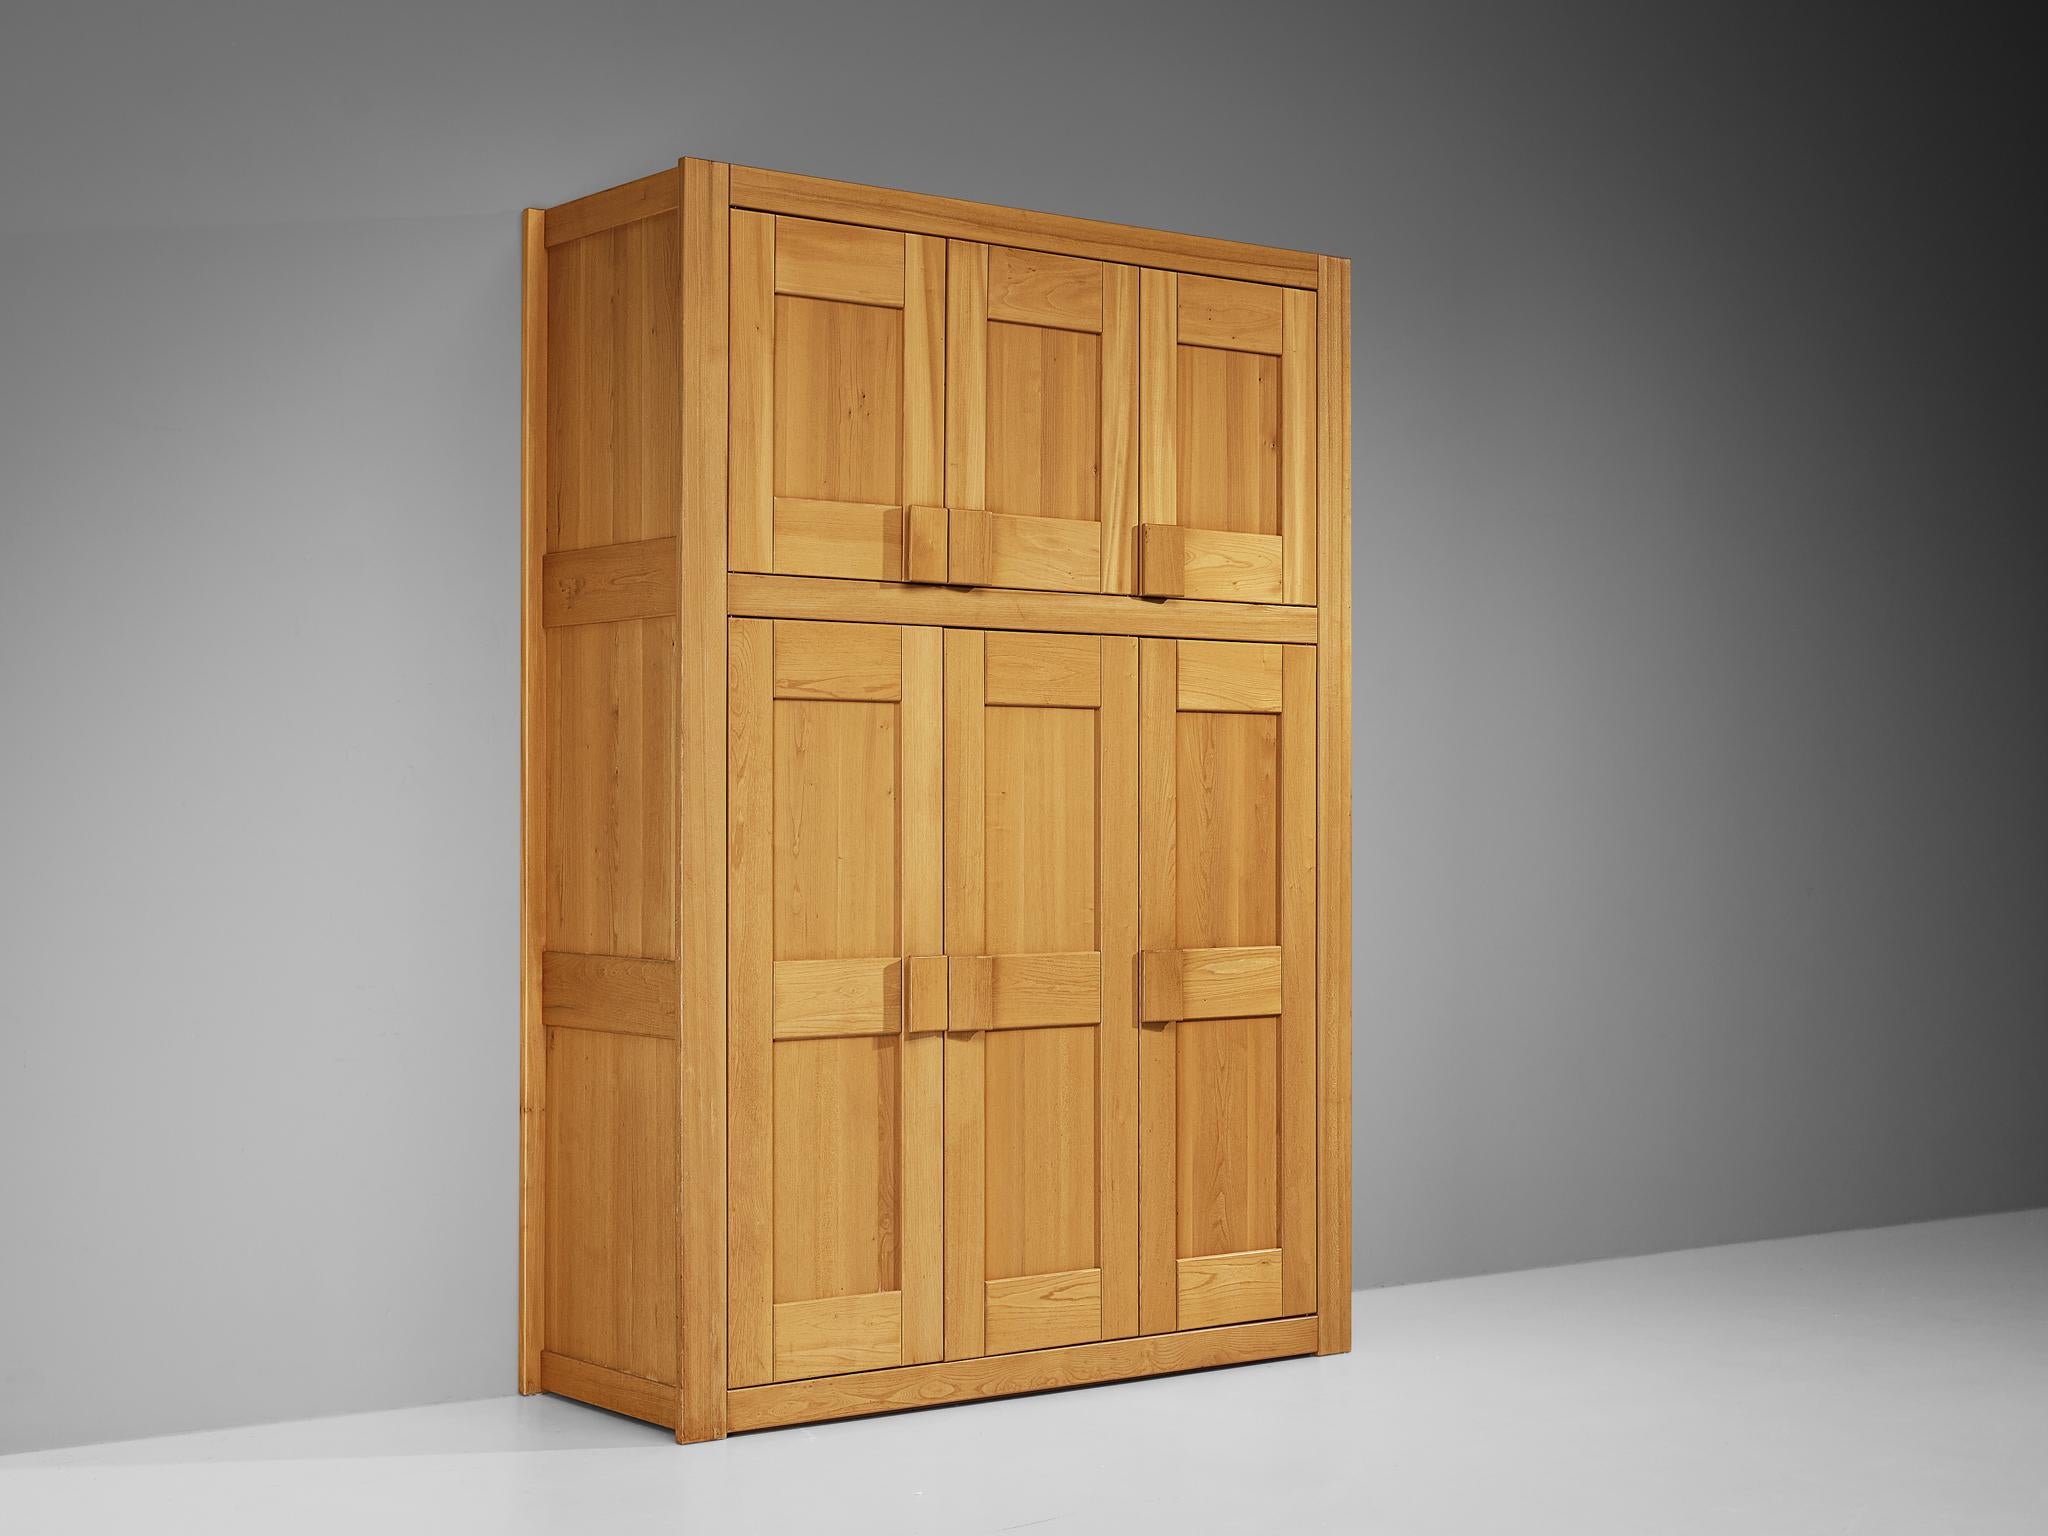 Maison Regain, wardrobe, solid elm, brass, France, 1970s

A rare armoire designed and crafted by Maison Regain. The wardrobe is sturdy and combines a simplified yet complex design with nifty, solid construction details that characterize Maison